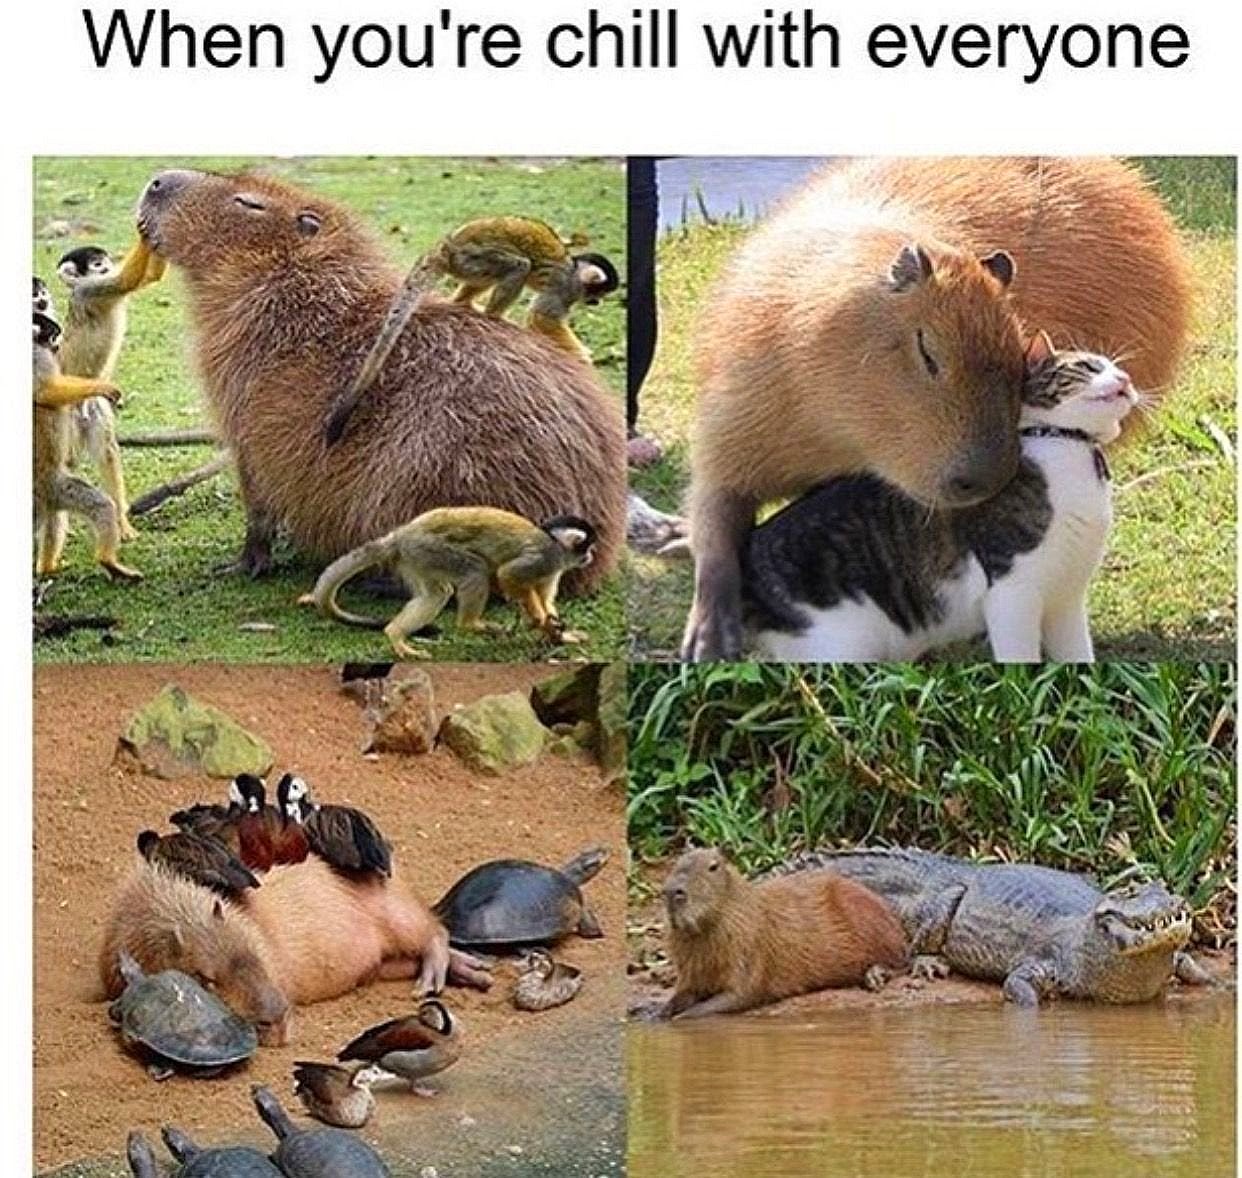 when you're chill with everyone, capybaras